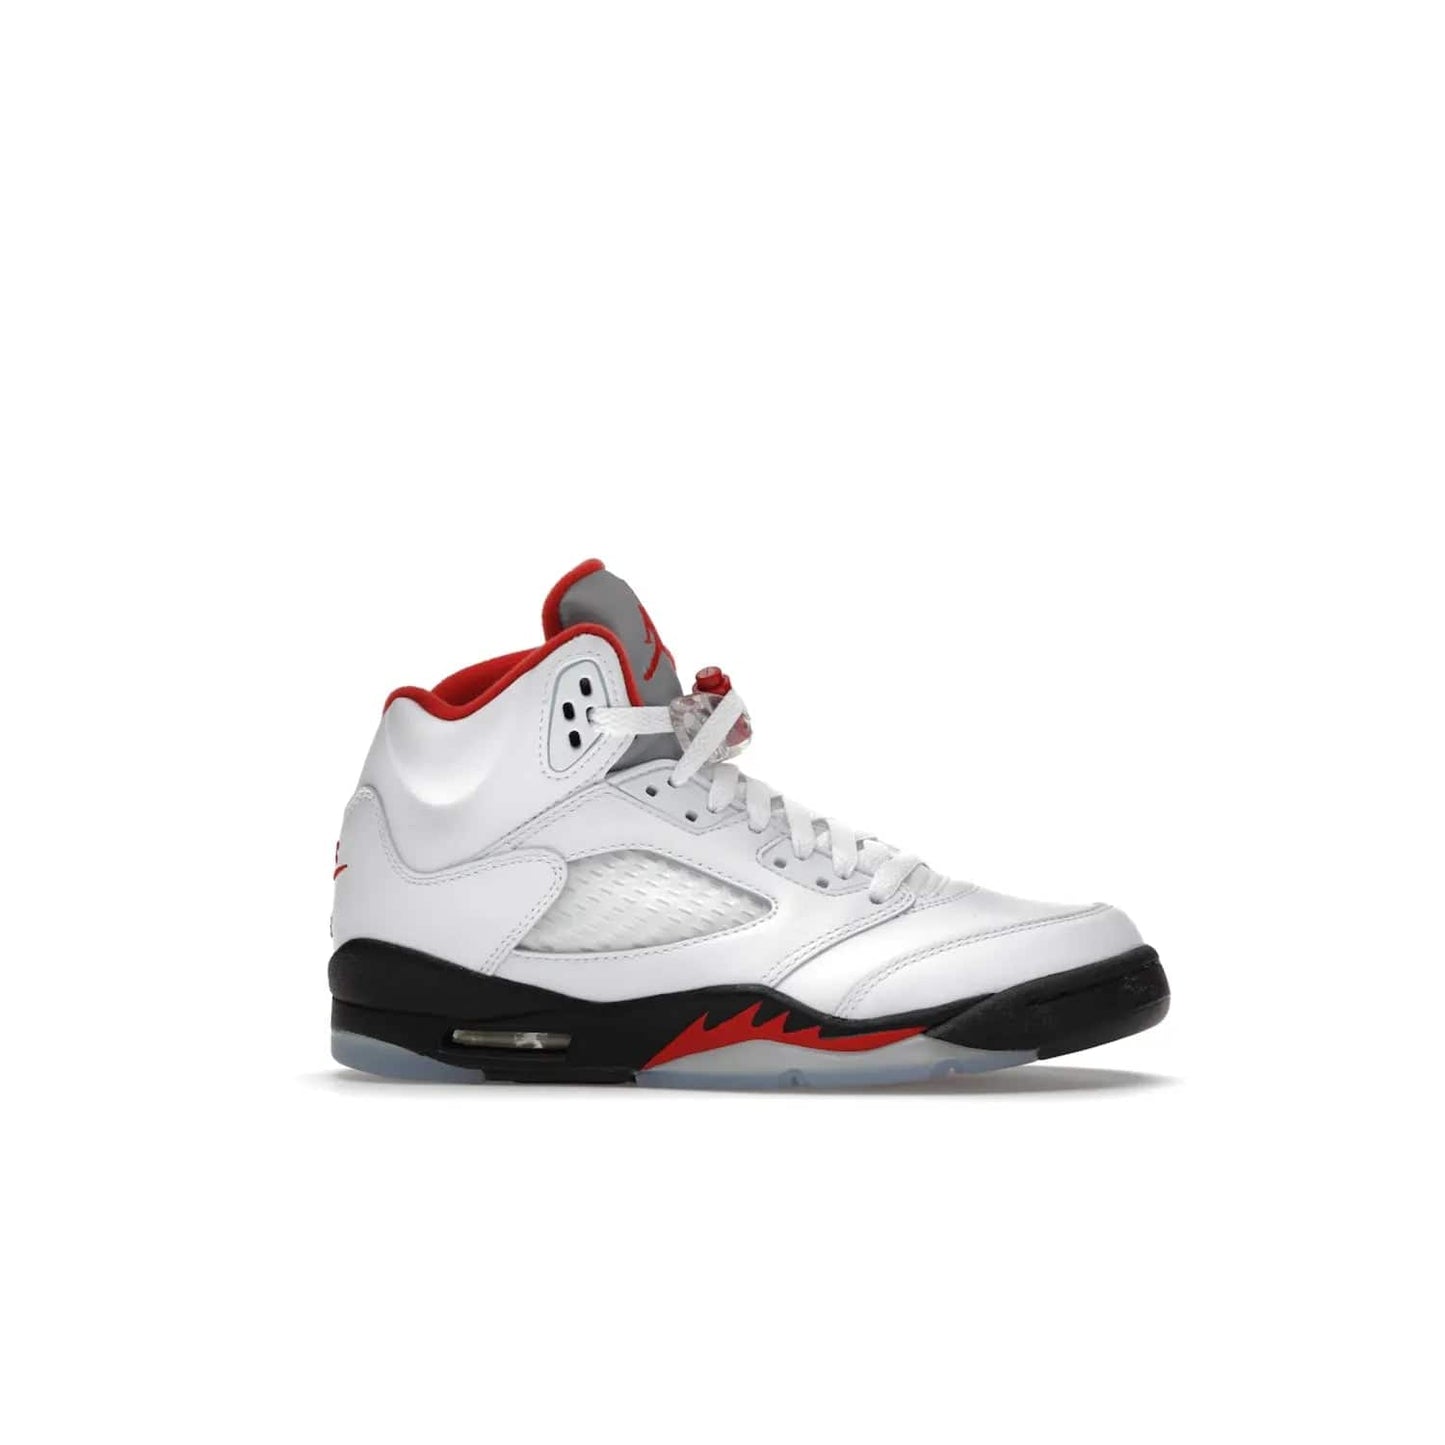 Jordan 5 Retro Fire Red Silver Tongue (2020) (GS) - Image 2 - Only at www.BallersClubKickz.com - A stylish option for any grade schooler. The Air Jordan 5 Retro Fire Red Silver Tongue 2020 GS features a combination of four hues, premium white leather, a clear mesh mid-upper and a reflective silver tongue. An icy translucent blue outsole completes the look. Available on May 2, $150.